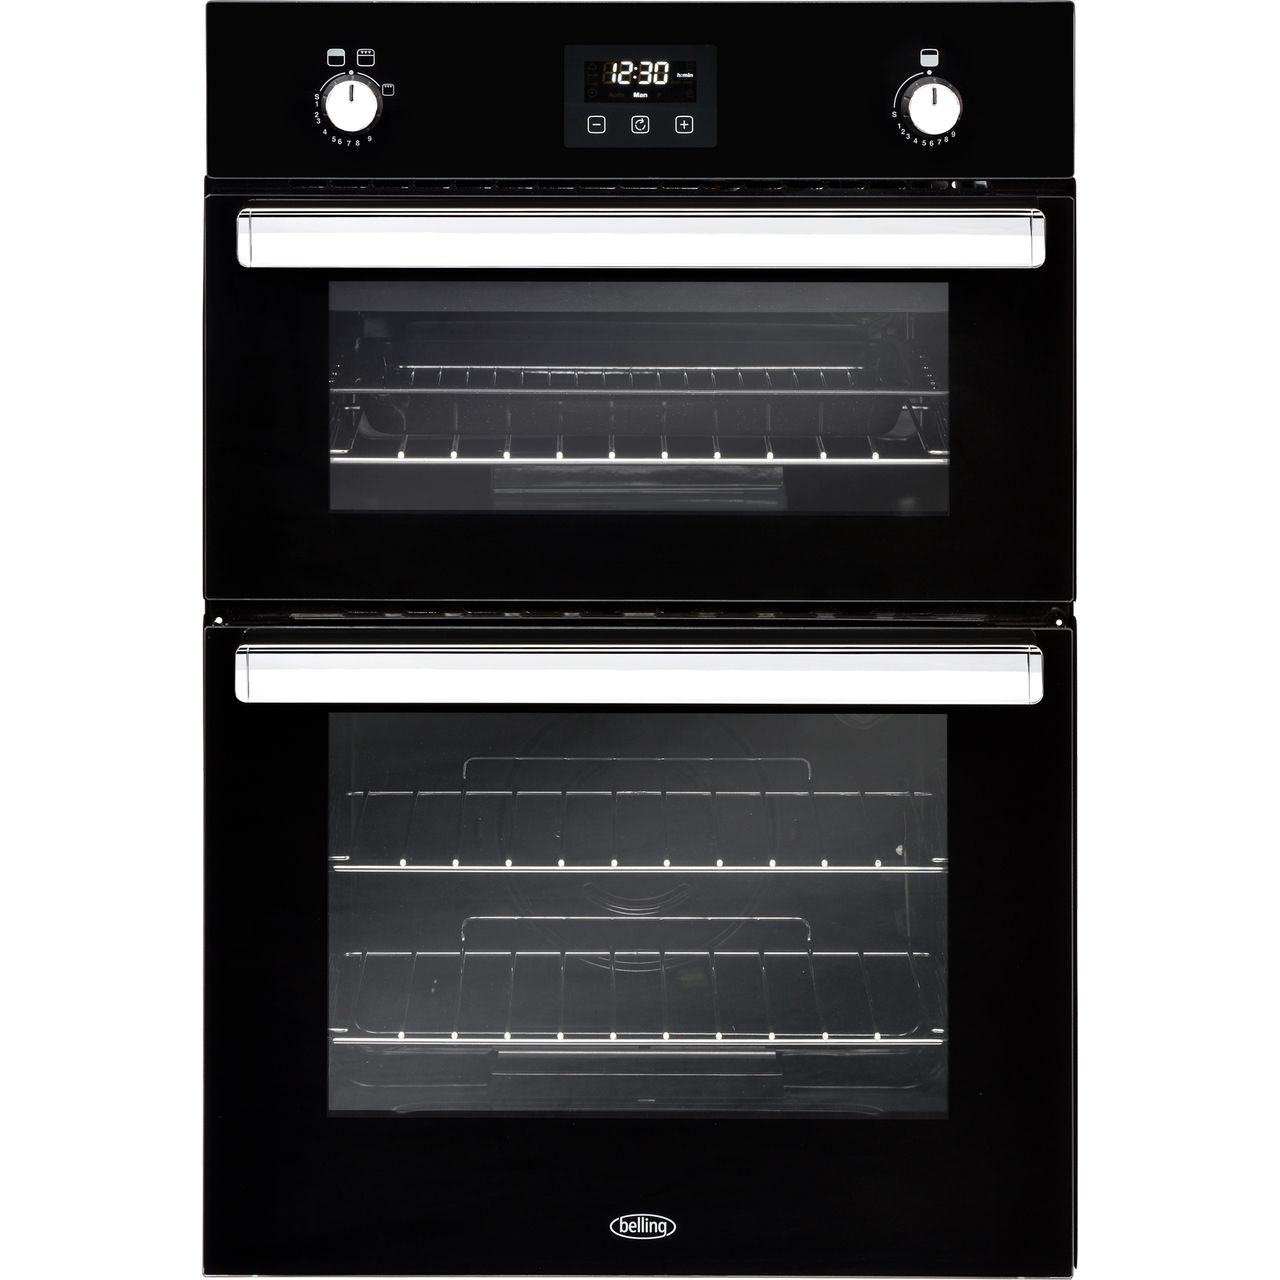 Belling BI902G Built In Double Oven with Full Width Electric Grill specs